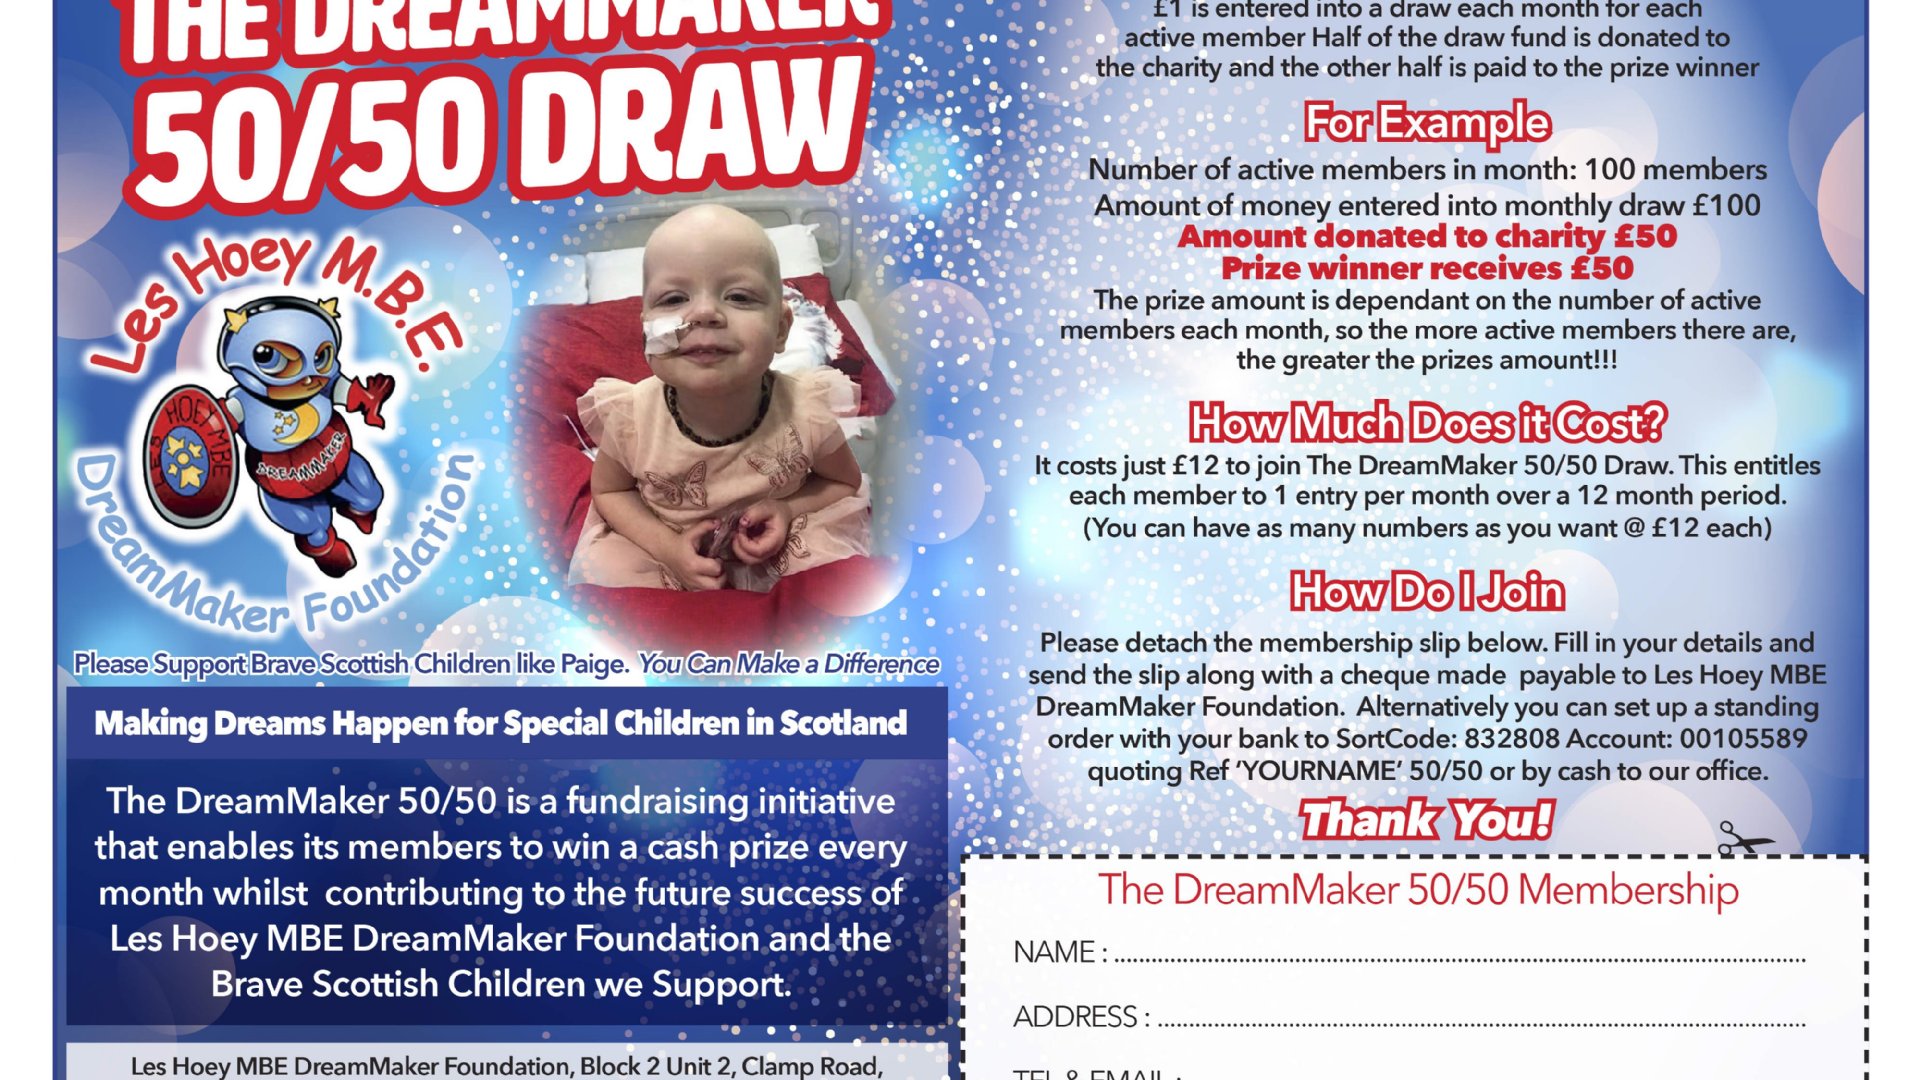 JOIN OUR 50/50 MONTHLY DRAW FOR ONLY £1...